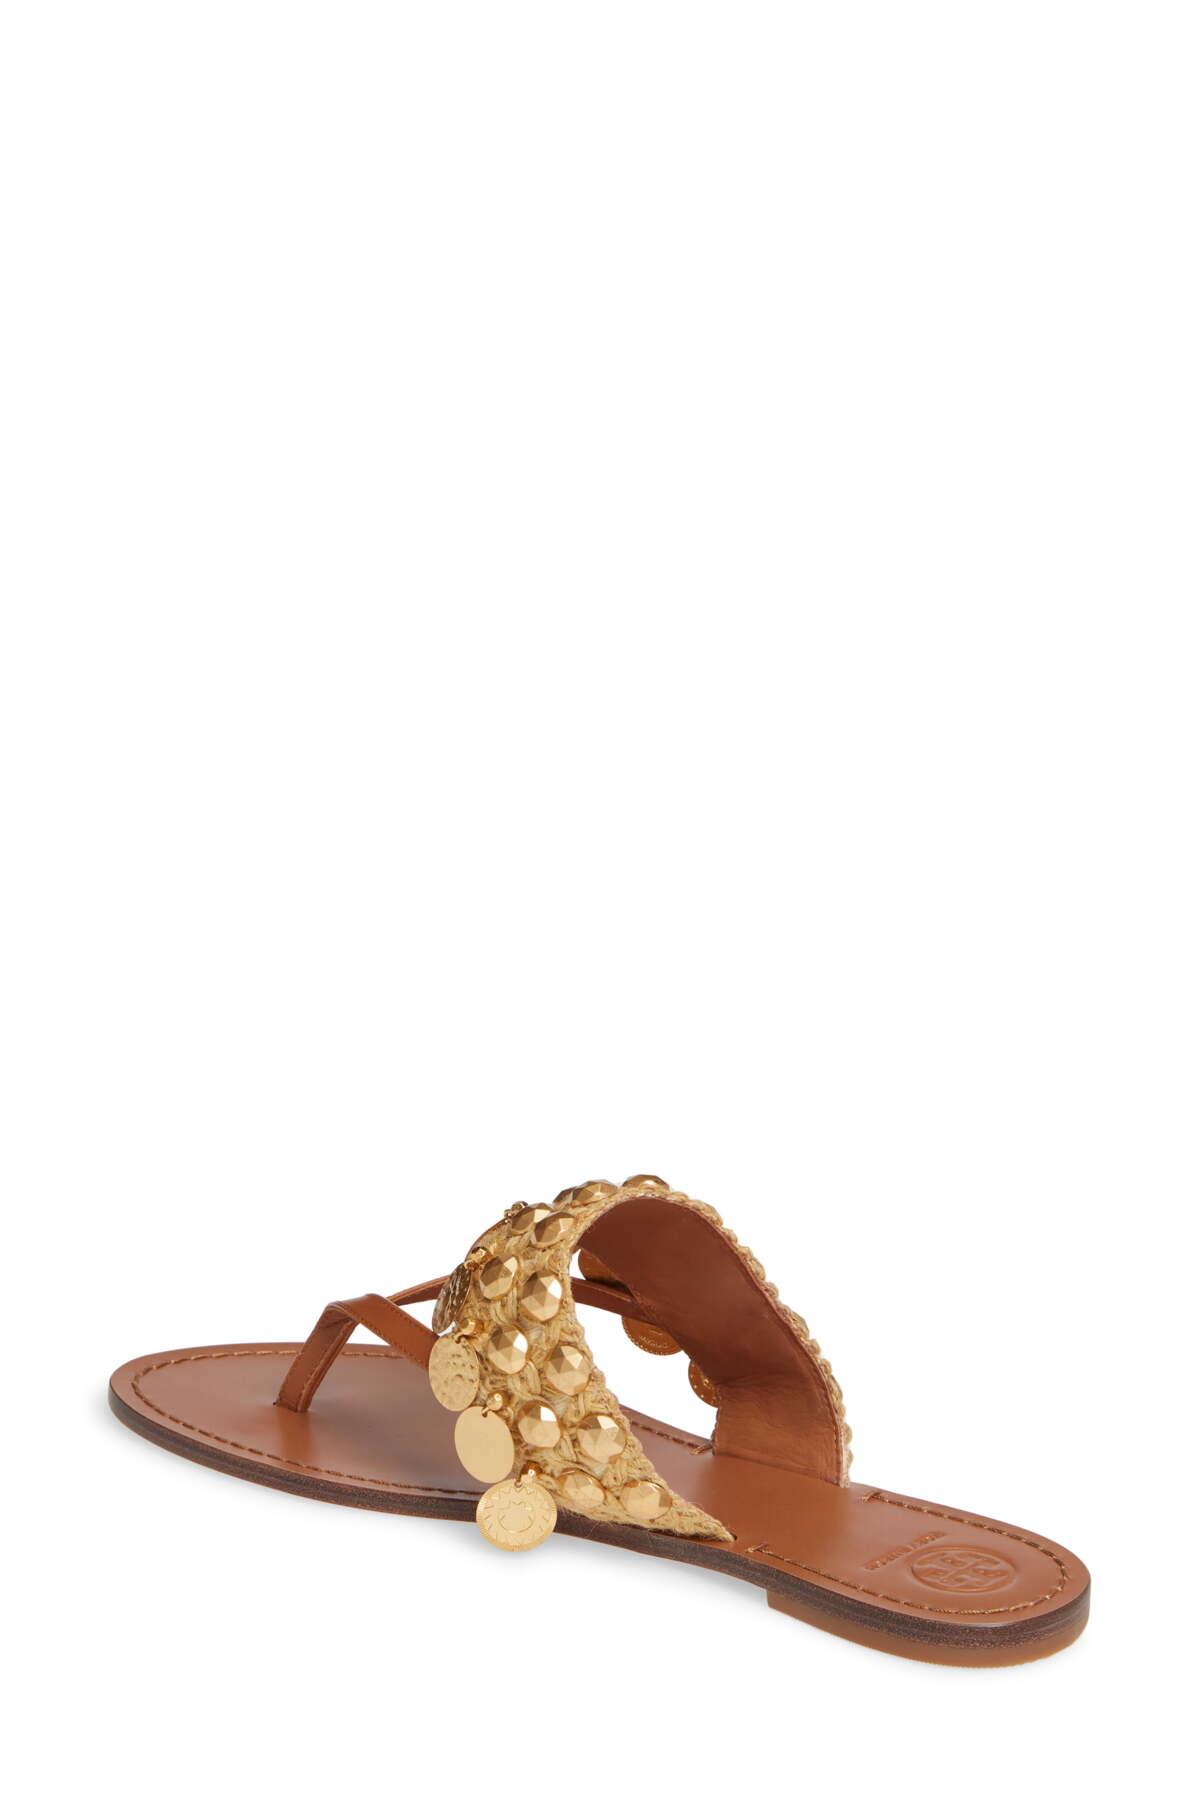 Tory Burch Leather Patos Coin Thong Sandal in Tan (Brown) - Lyst